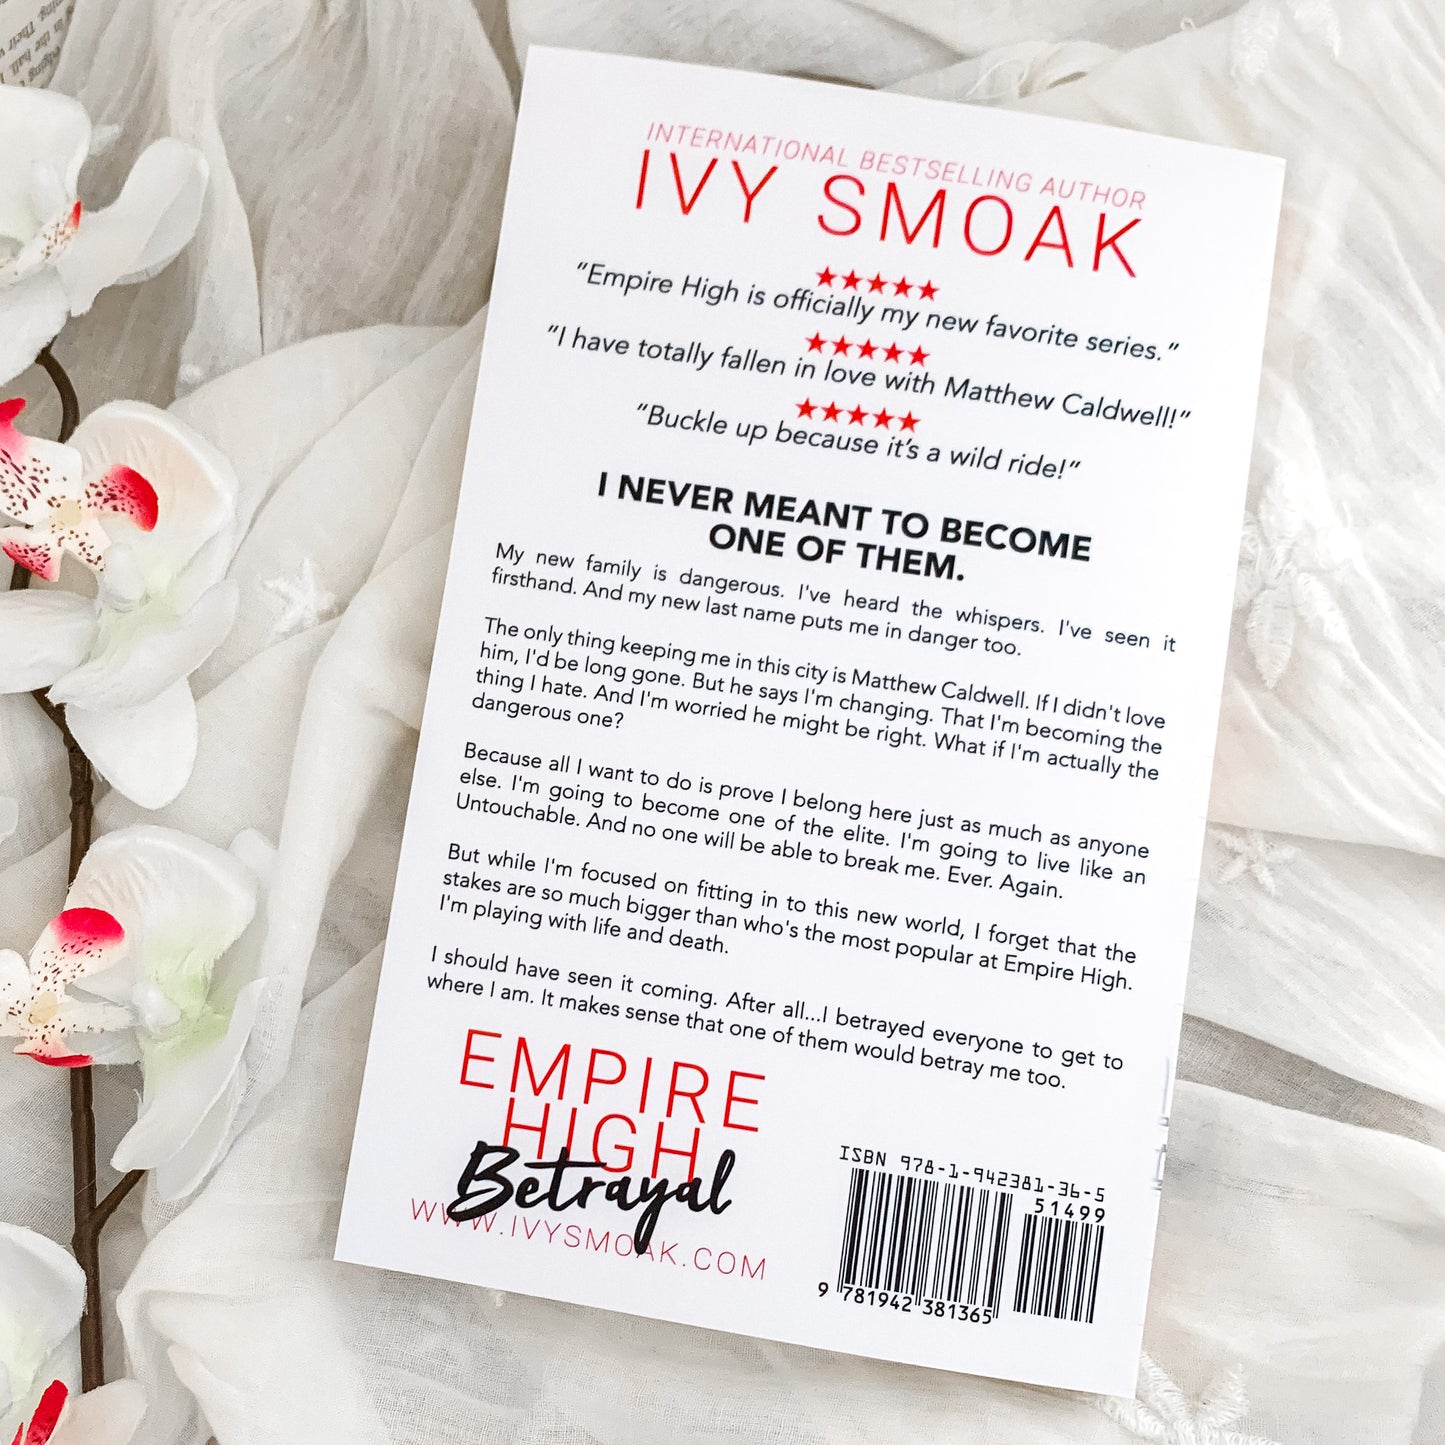 Empire High Series by Ivy Smoak